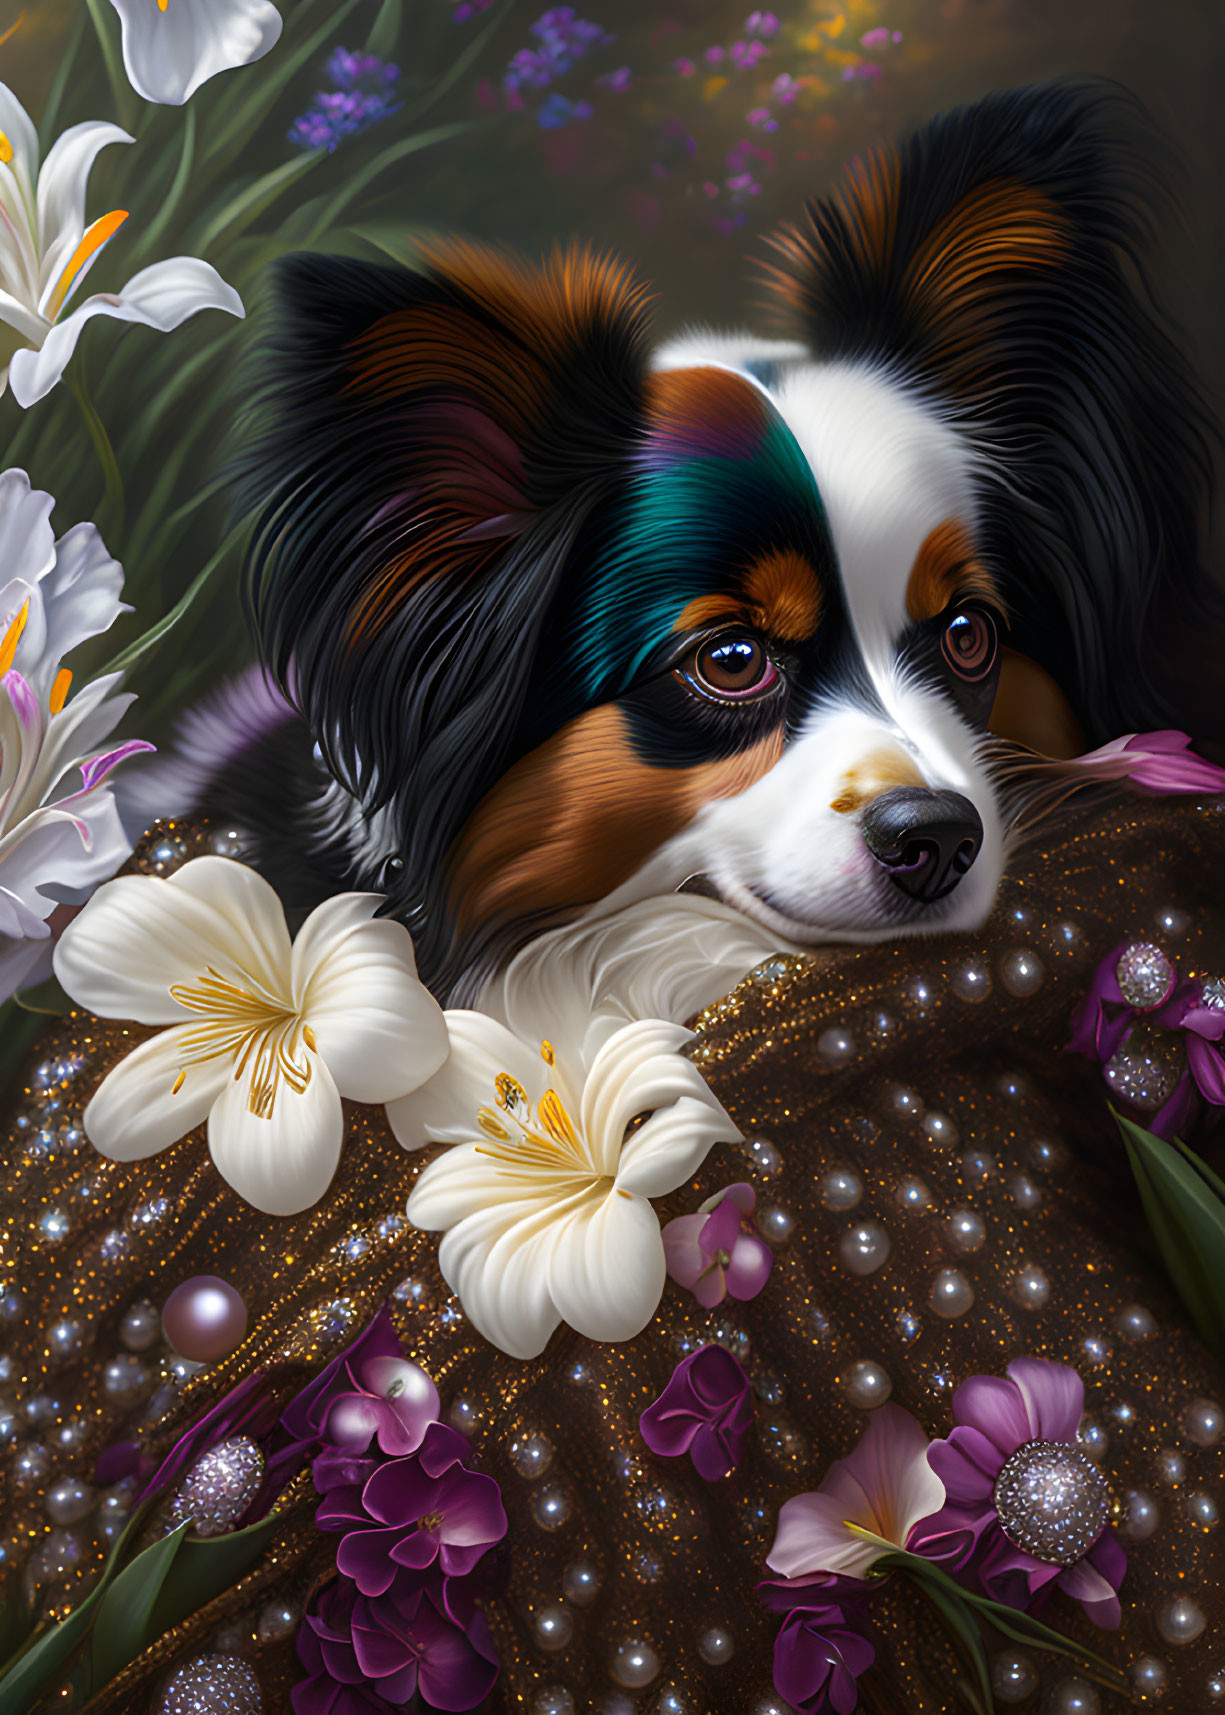 Vibrant Papillon Dog Illustration with Flowers and Decorative Elements